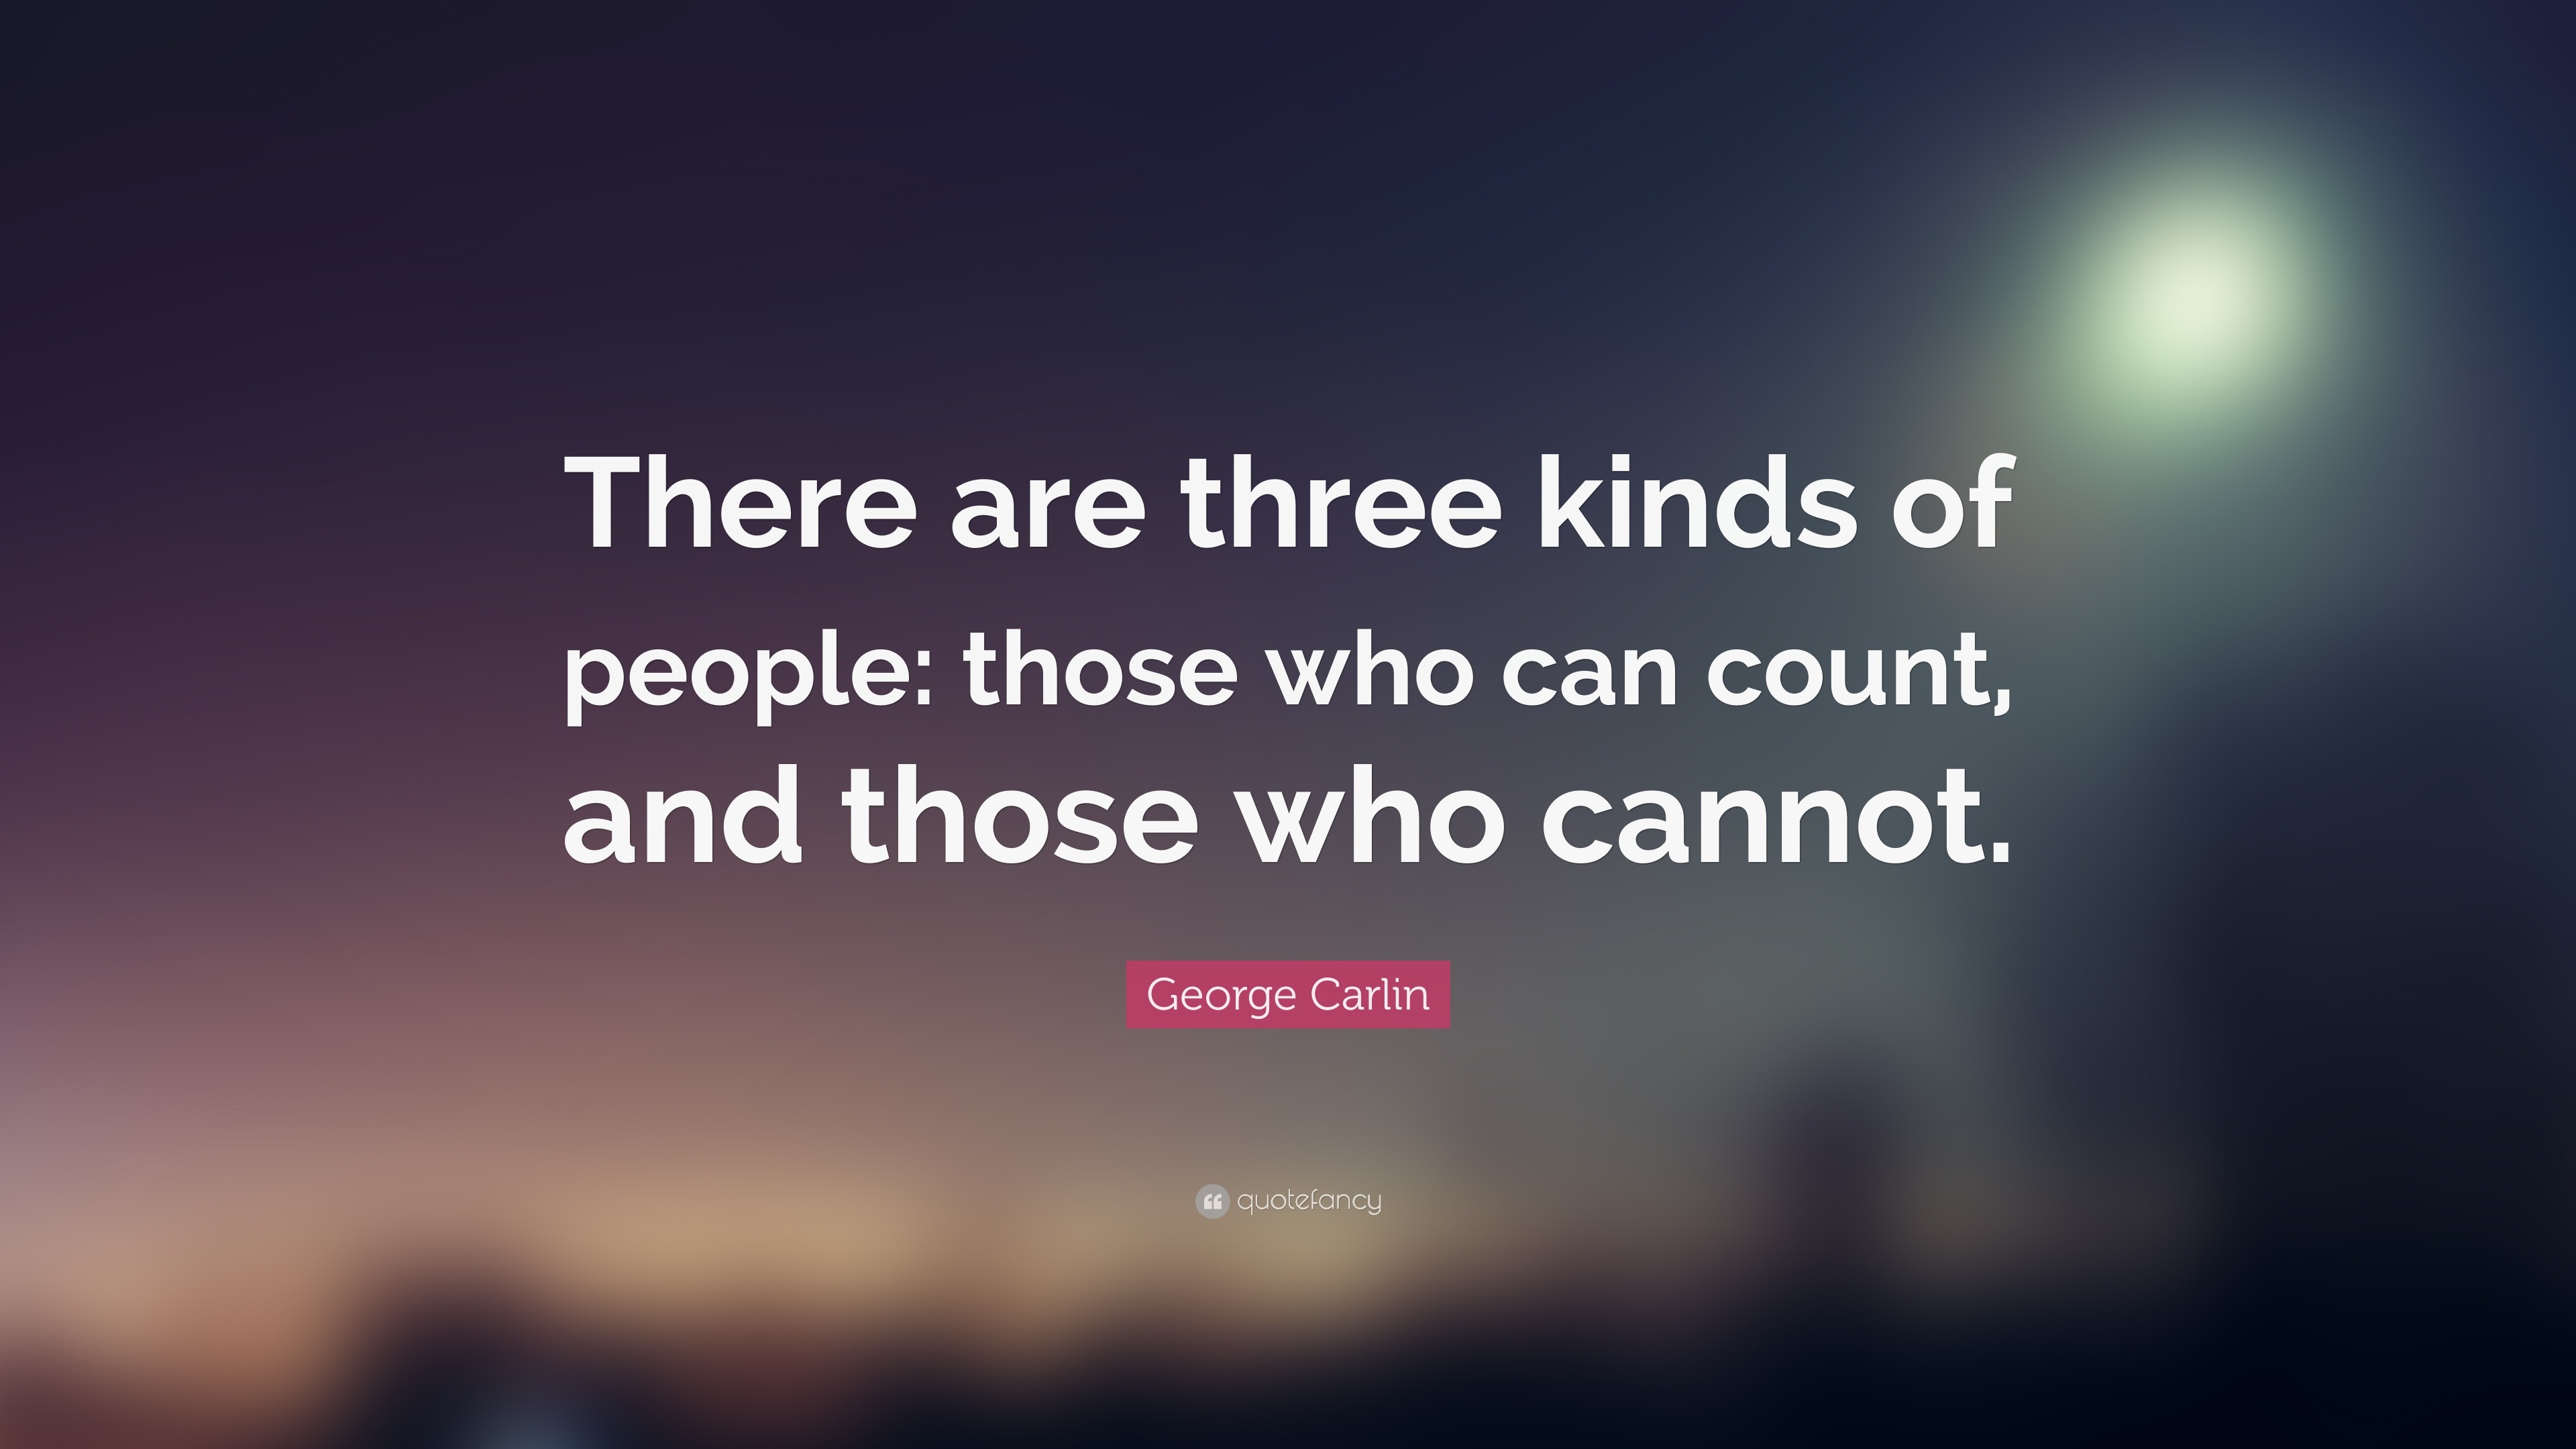 George Carlin Quote: “There are three kinds of people: those who can